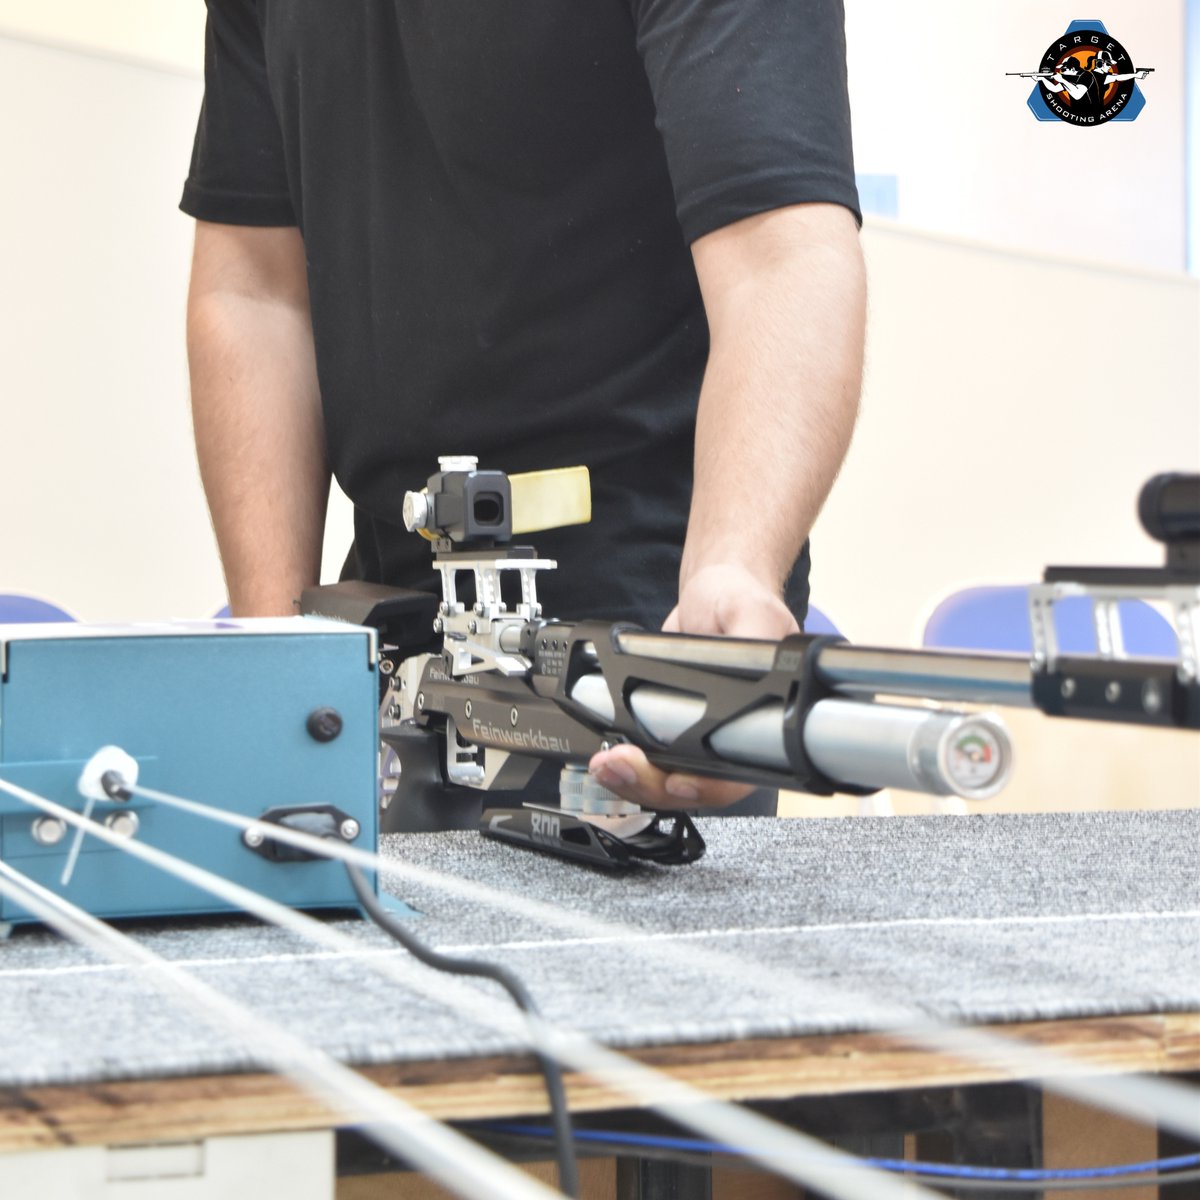 Locked and loaded for another day at the shooting range. Letting off some steam and honing those marksmanship skills! 📷 #ShootingRange #Bullseye #TargetPractice #ReadyAimFire #targetshootingarena #mohali